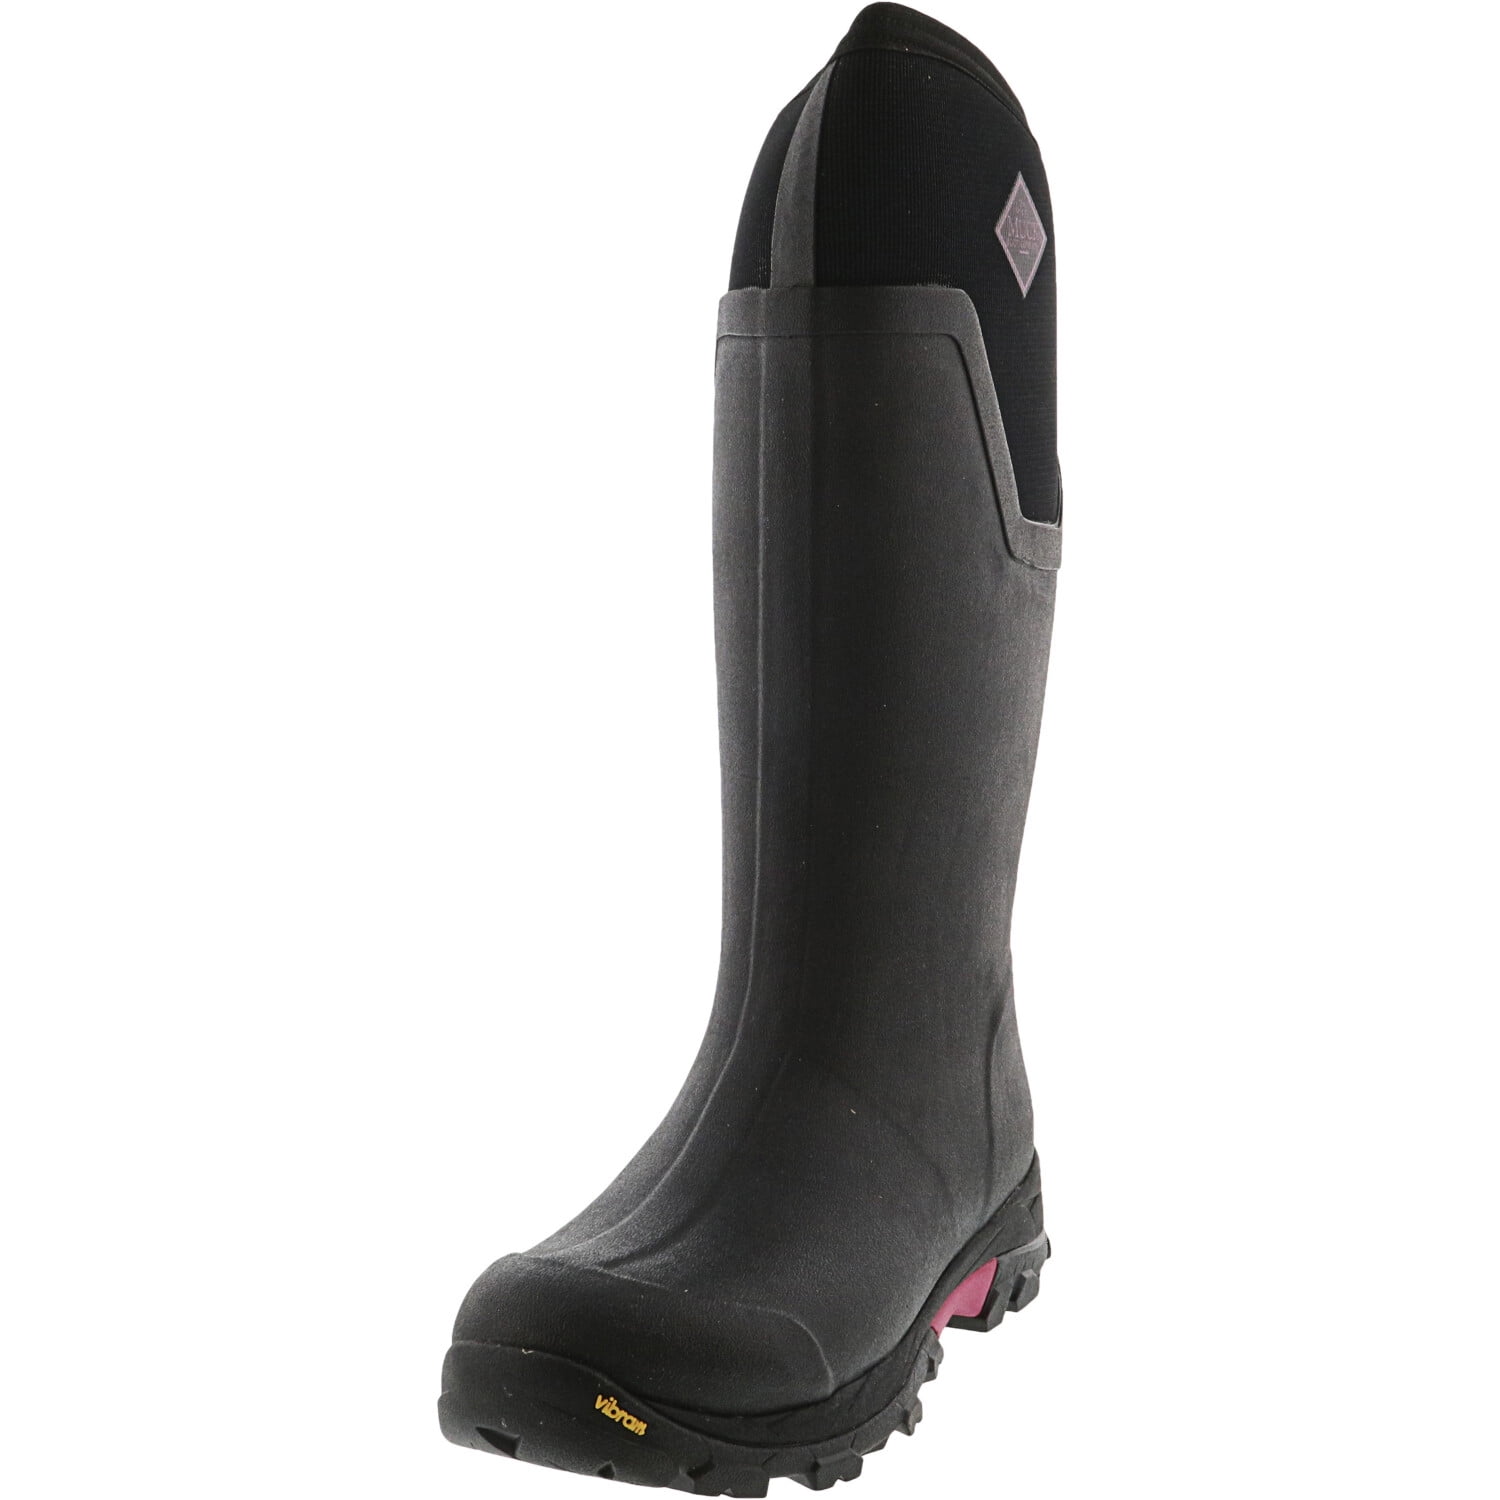 muck boots arctic tall